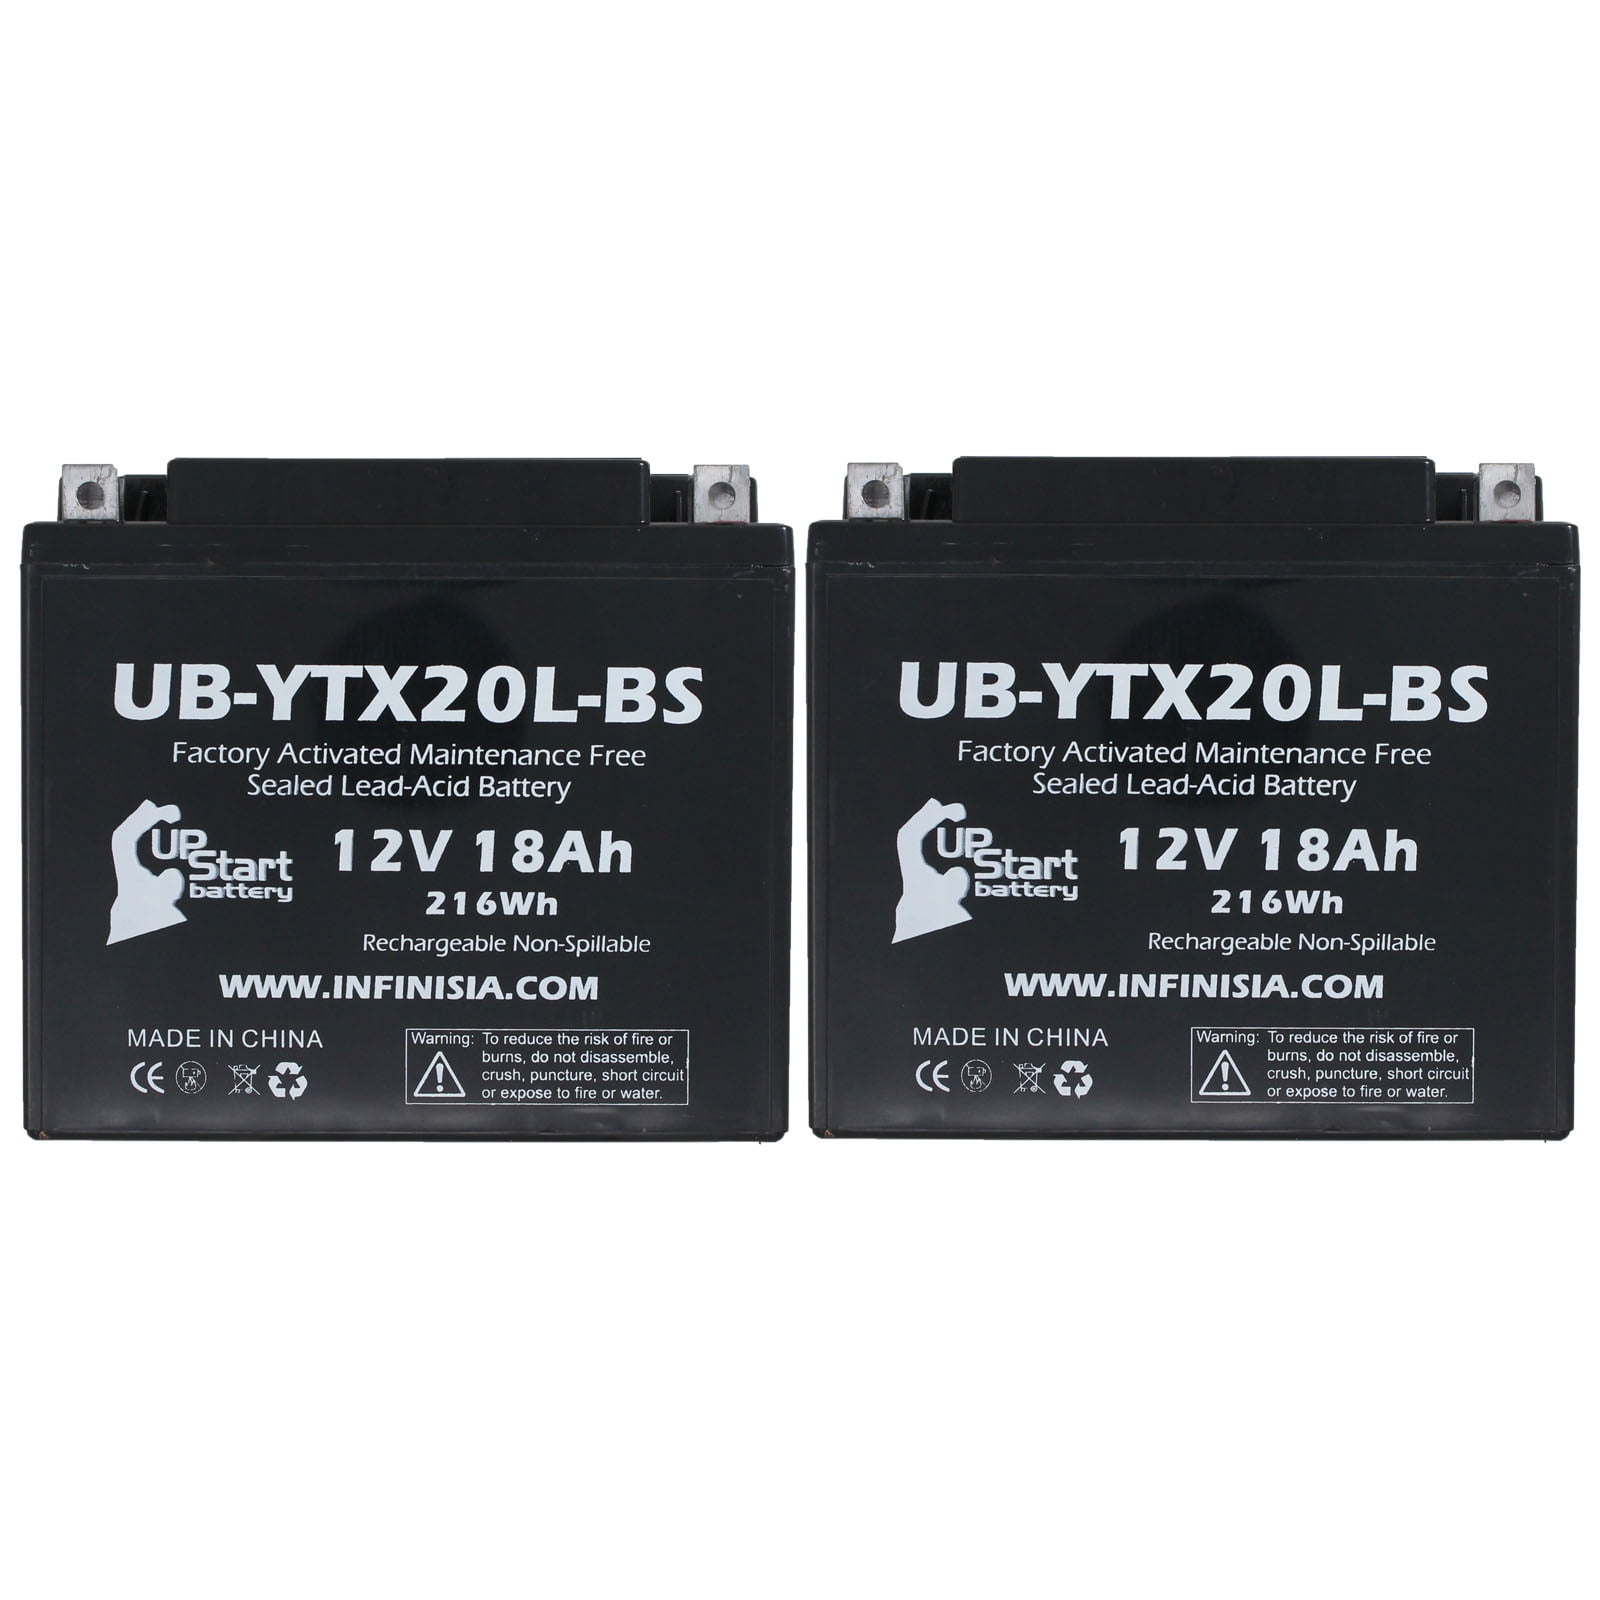 gåde Ofre Dokument 2-Pack UB-YTX20L-BS Battery Replacement for 1992 Kawasaki KZ1000-P Police  1000 CC Motorcycle - Factory Activated, Maintenance Free, Motorcycle  Battery - 12V, 18AH, UpStart Battery Brand - Walmart.com